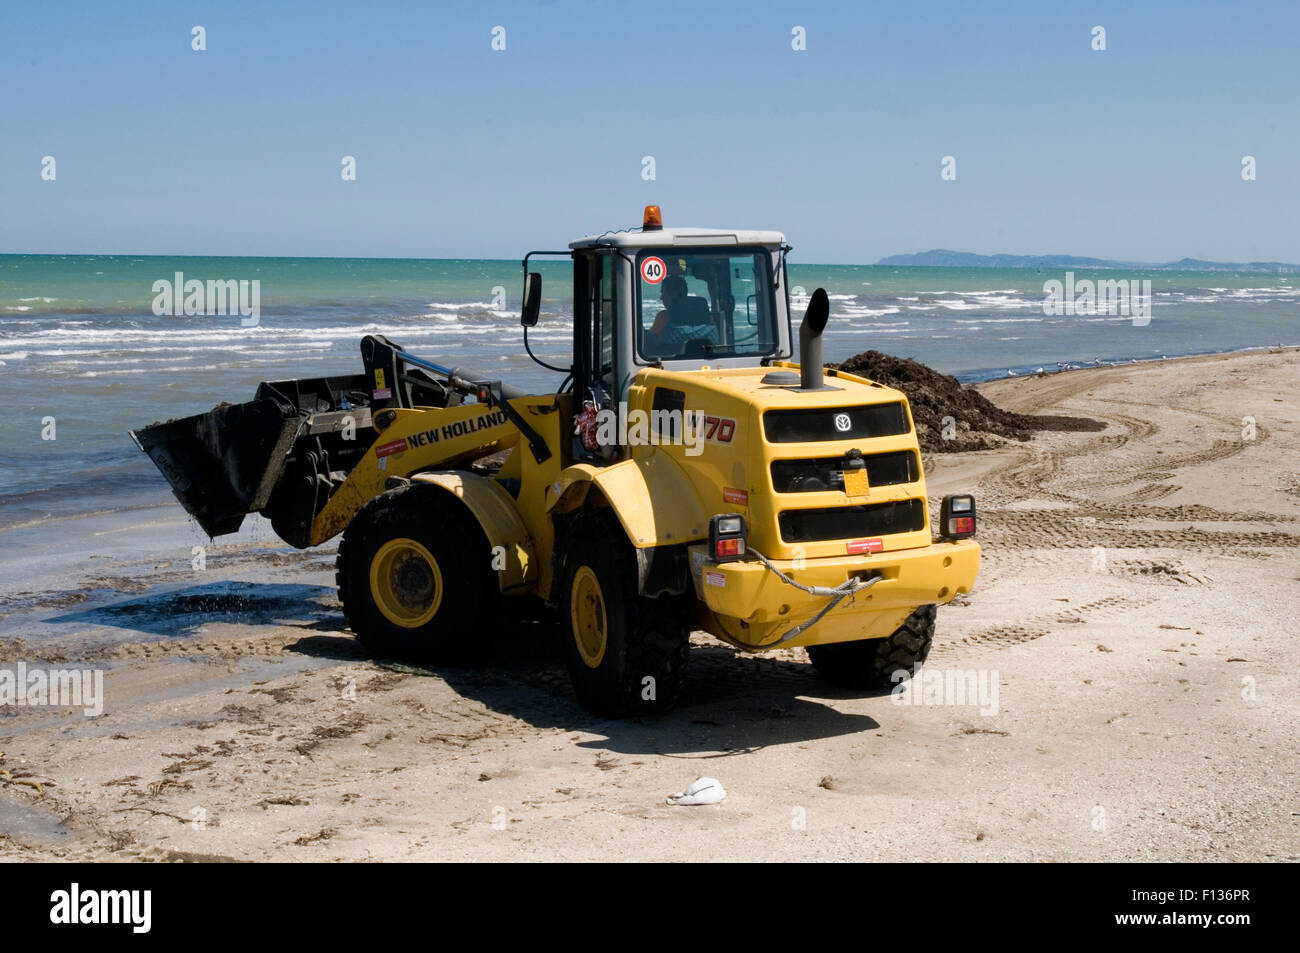 new holland digger diggers earth mover movers excavator earthmovers earthmover big yellow dig digging an hole bucket excavators Stock Photo